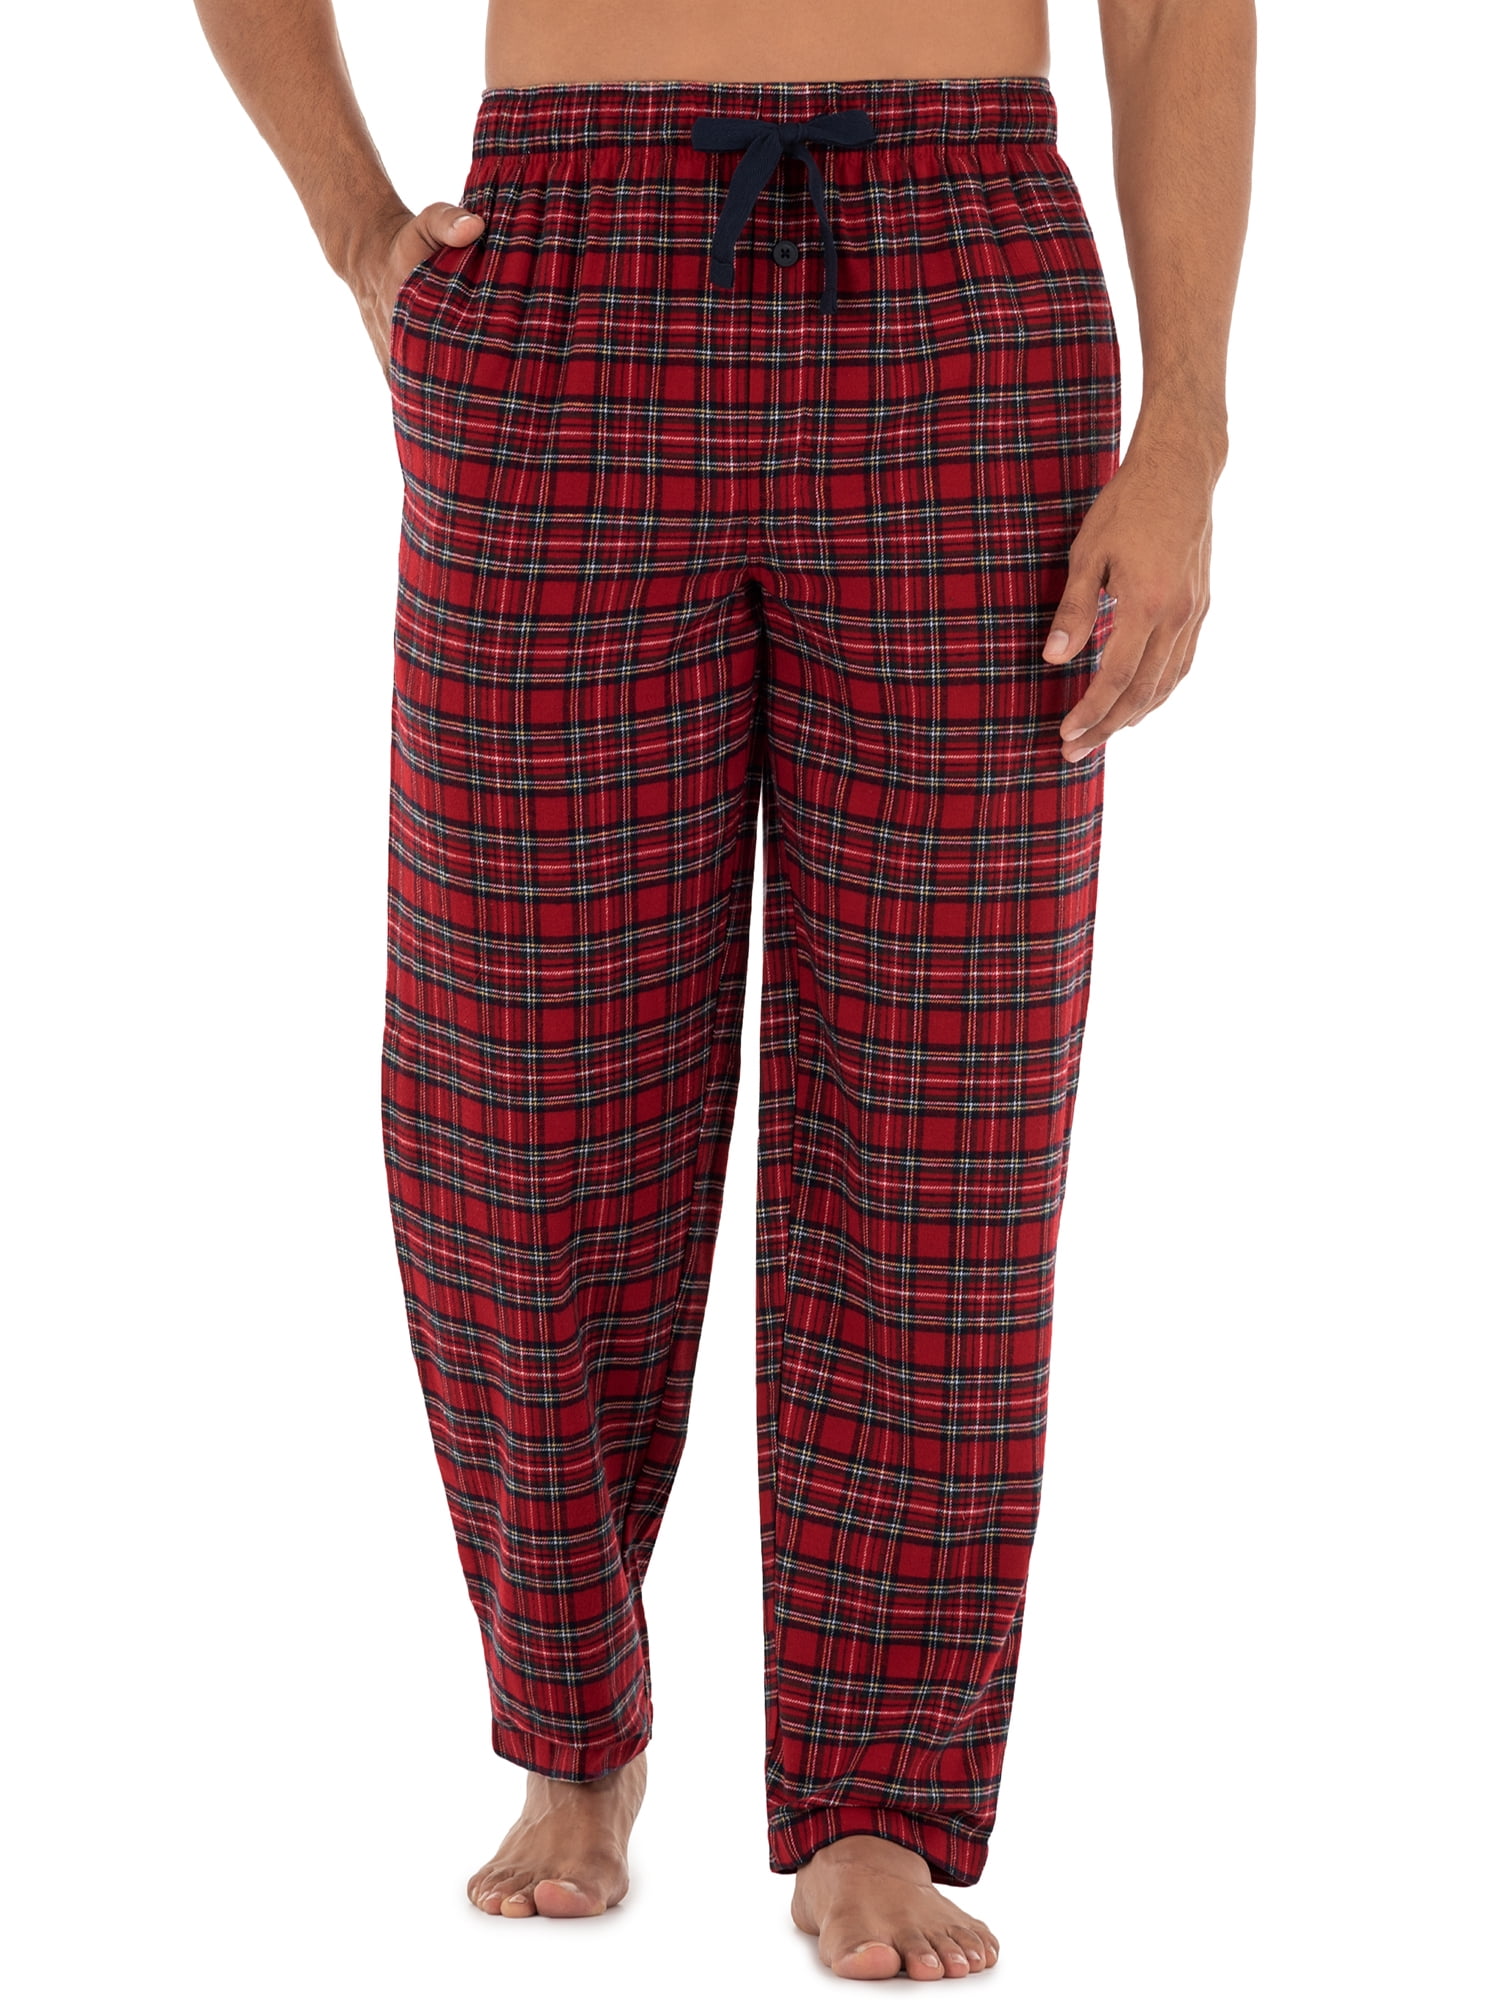 Fruit of the Loom Men's and Big Men's Microsanded Woven Plaid Pajama Pants,  Sizes S-6XL & LT-3XLT